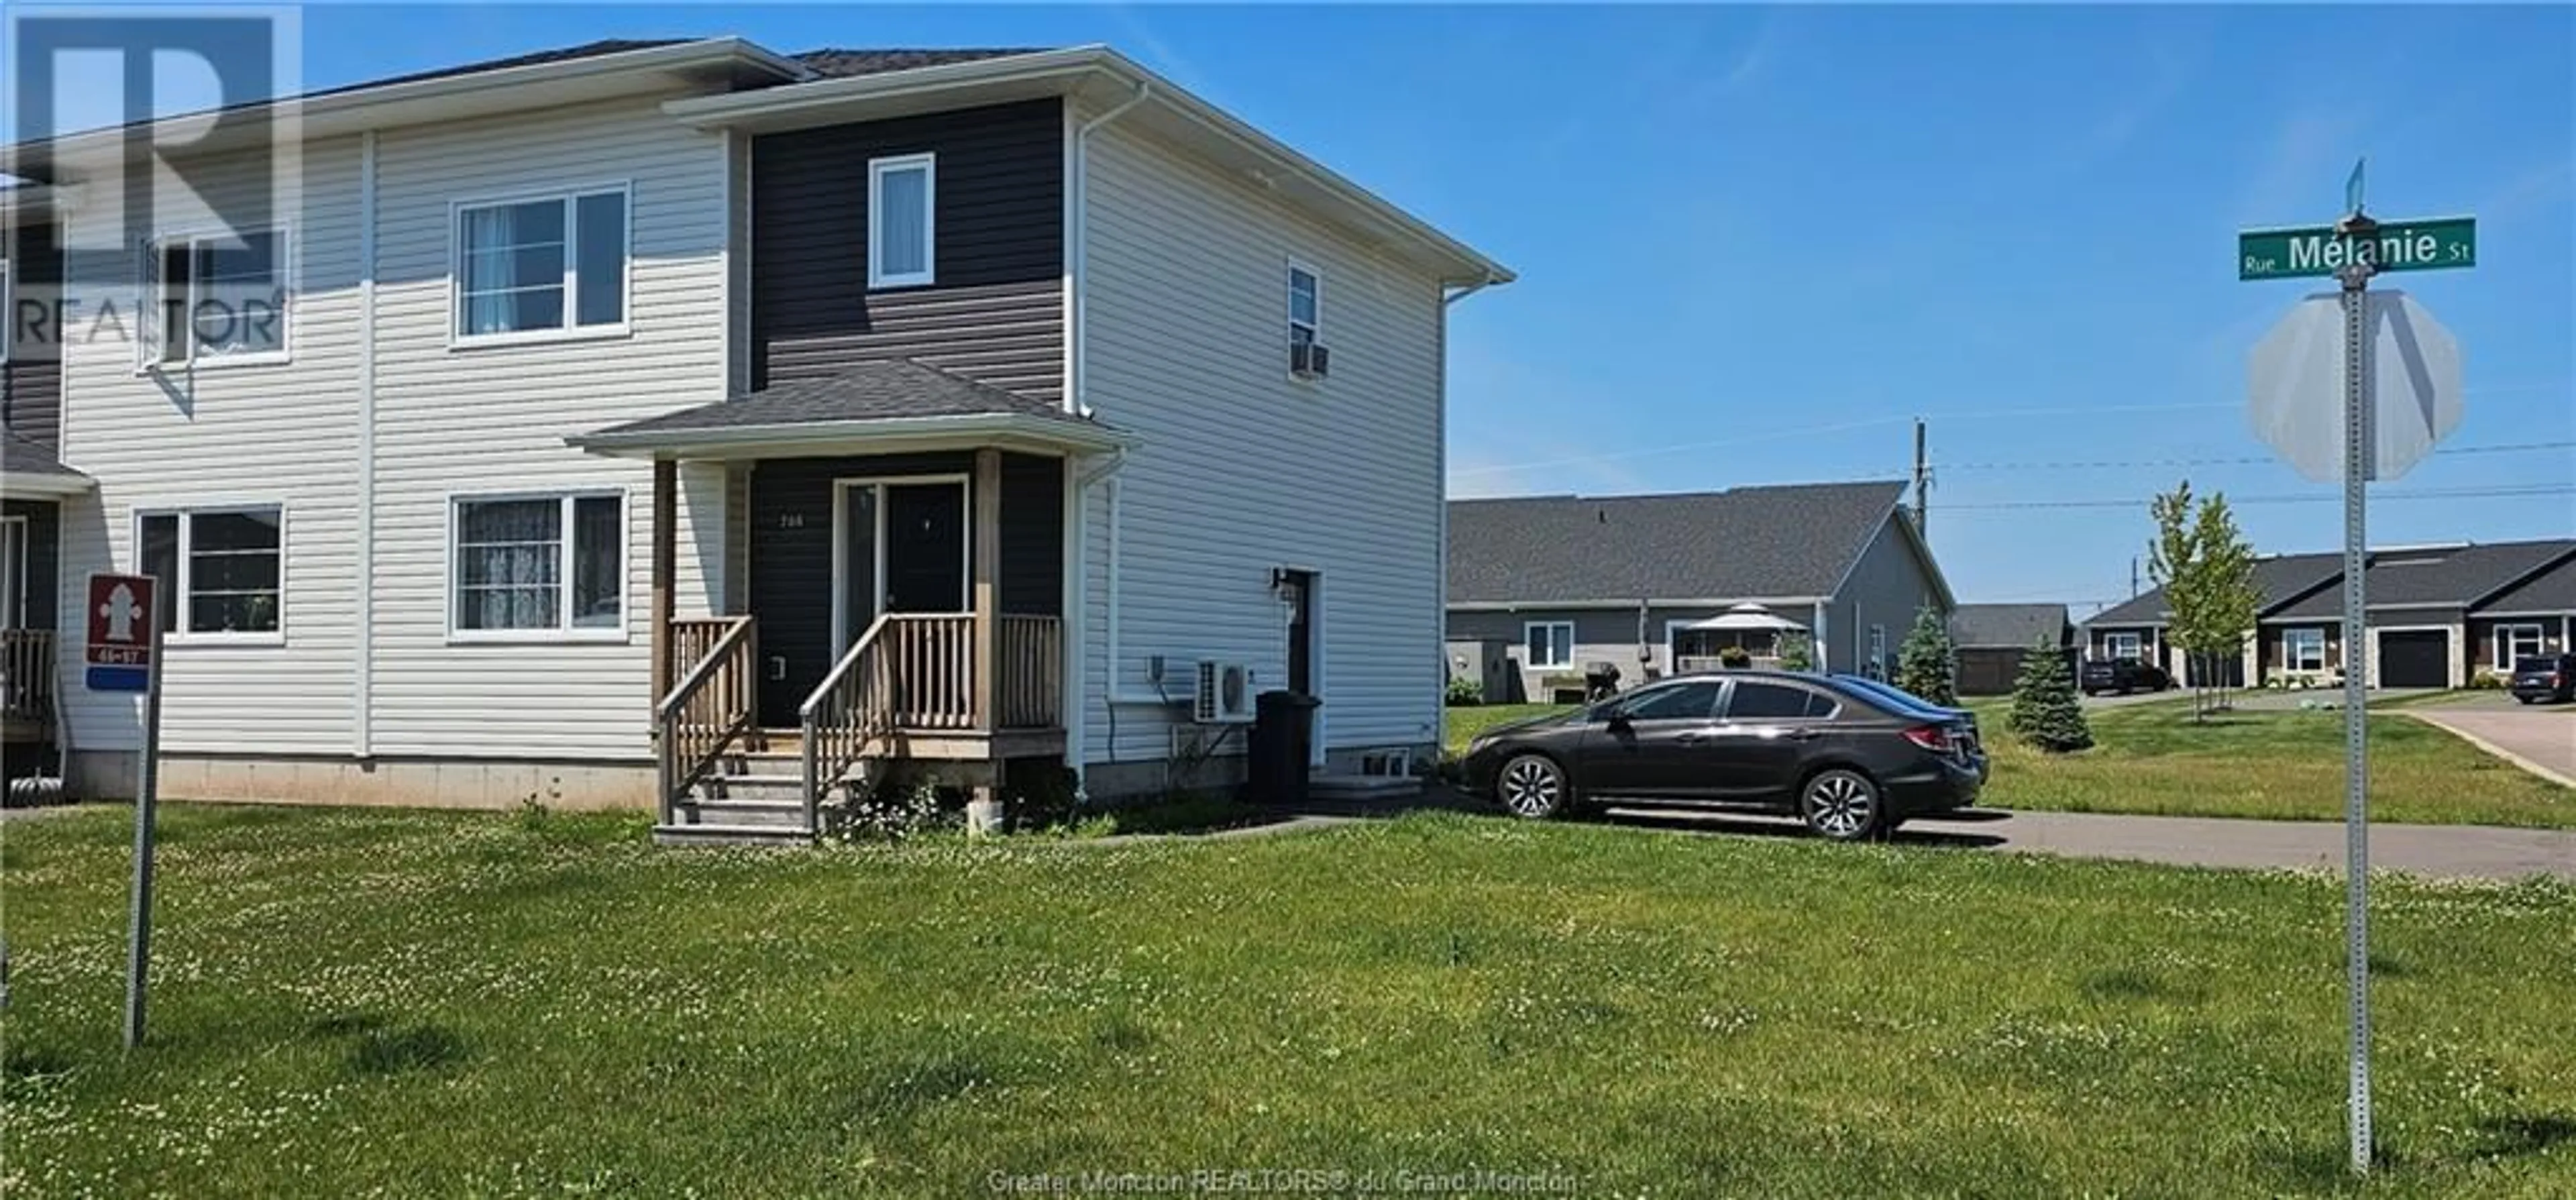 Frontside or backside of a home for 206 Melanie, Dieppe New Brunswick E1A8N5